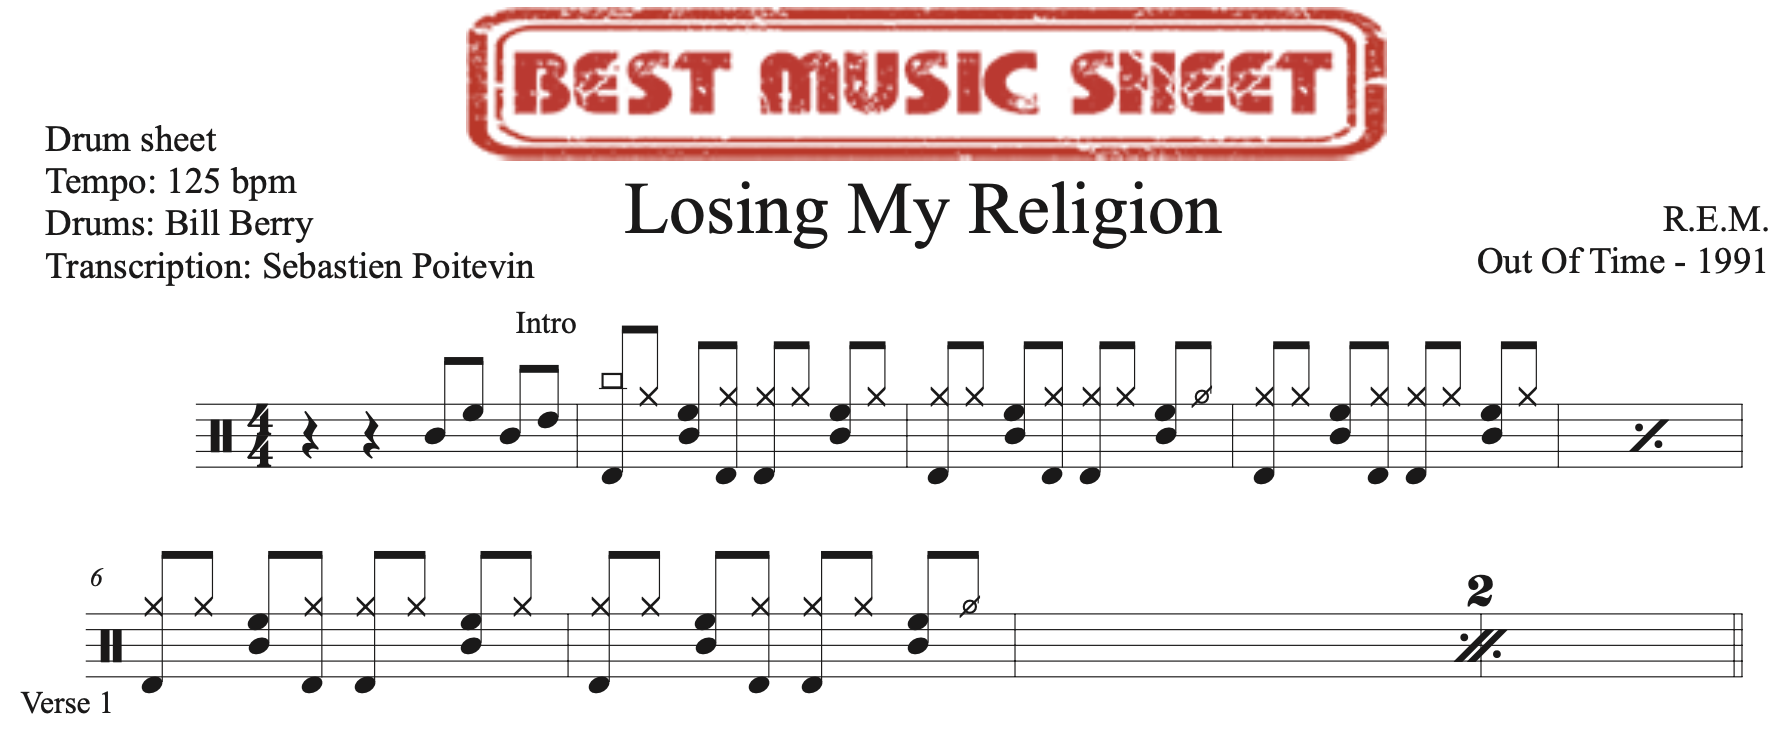 Sample of the drum sheet losing my religion by REM